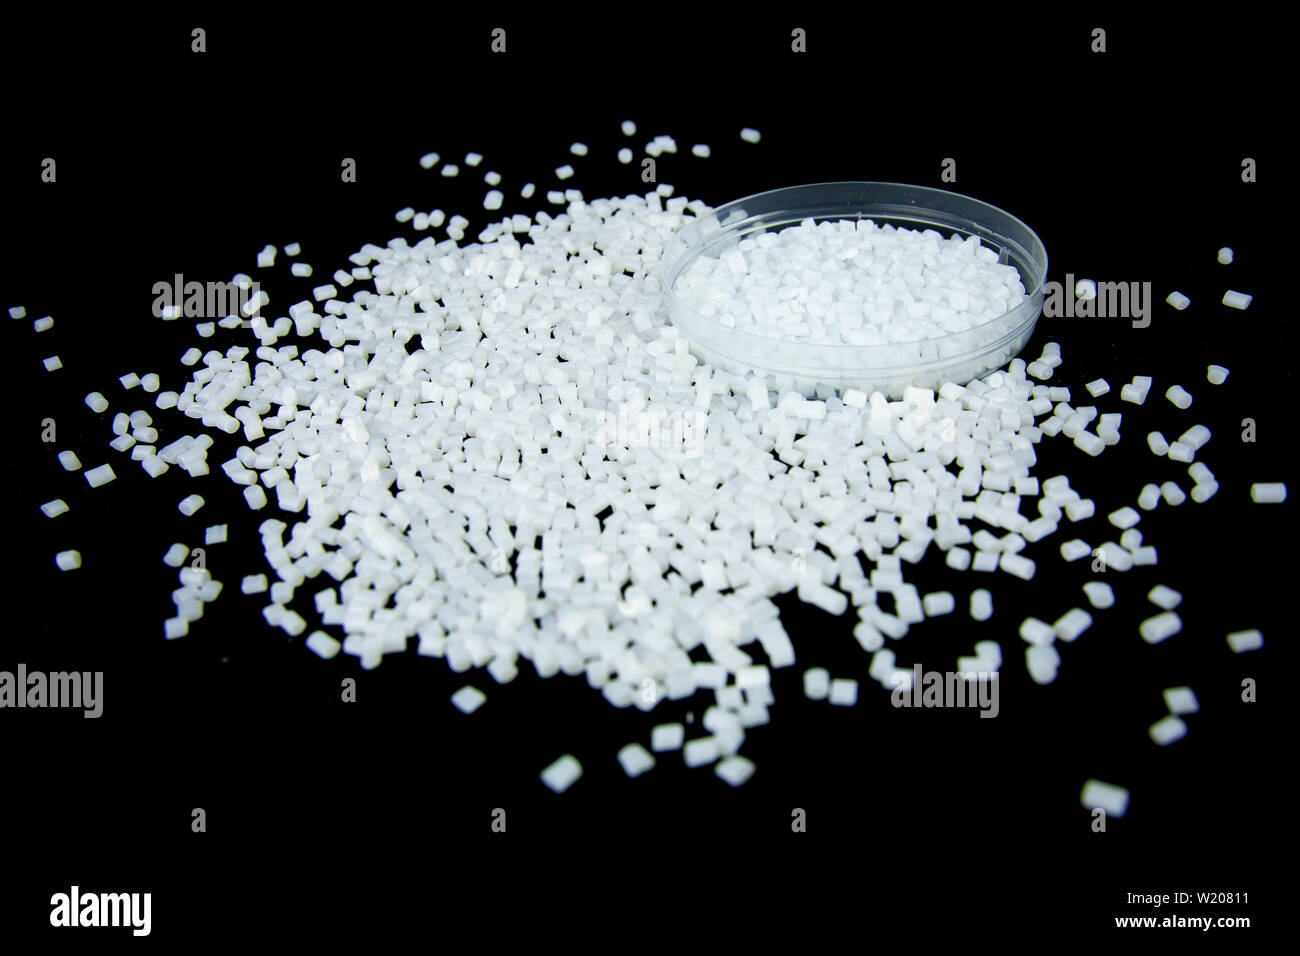 Transparent Polypropylene, polypropene, polystyrene, polyethylene, thermoplastic polymer, HDPE and plastic raw material pellets or granules. Stock Photo